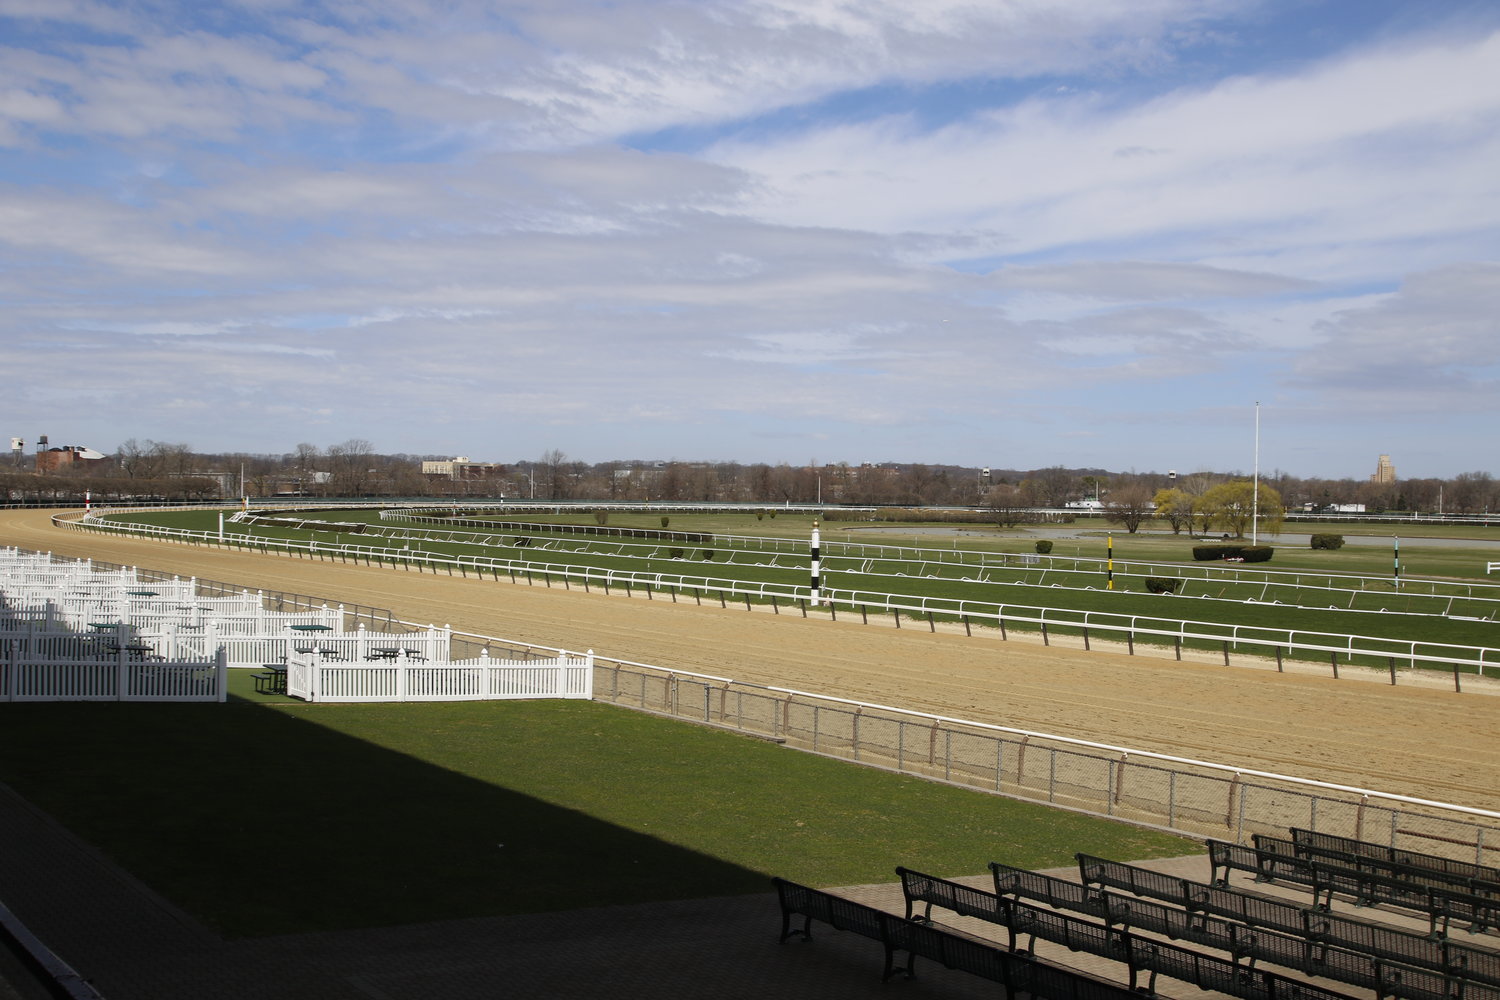 Gov. Kathy Hochul recently announced her support for the New York Racing Association’s plan to redevelop Belmont Park in Elmont, which would winterize the horse racing track and build a new clubhouse and grandstand.